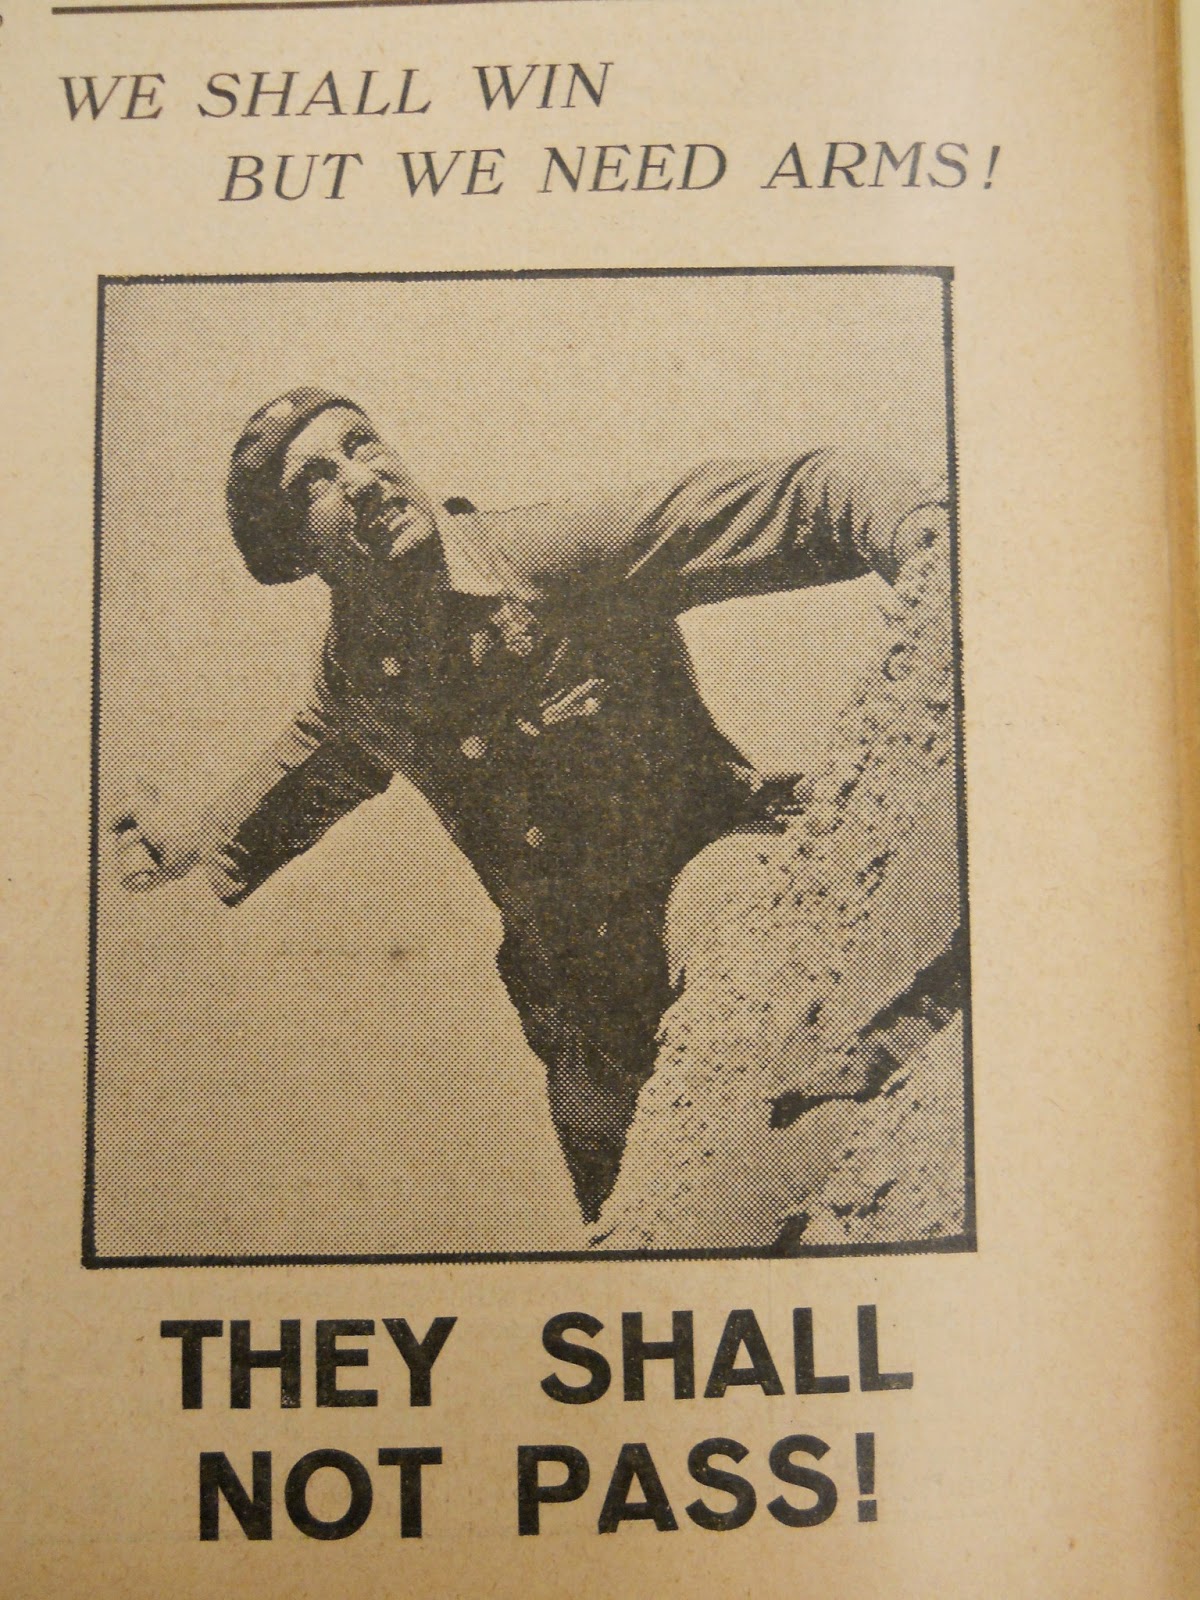 Cover of a pamphlet featuring a photo of a man about to throw a grenade, Text: We shall win but we need arms! They shall not pass!